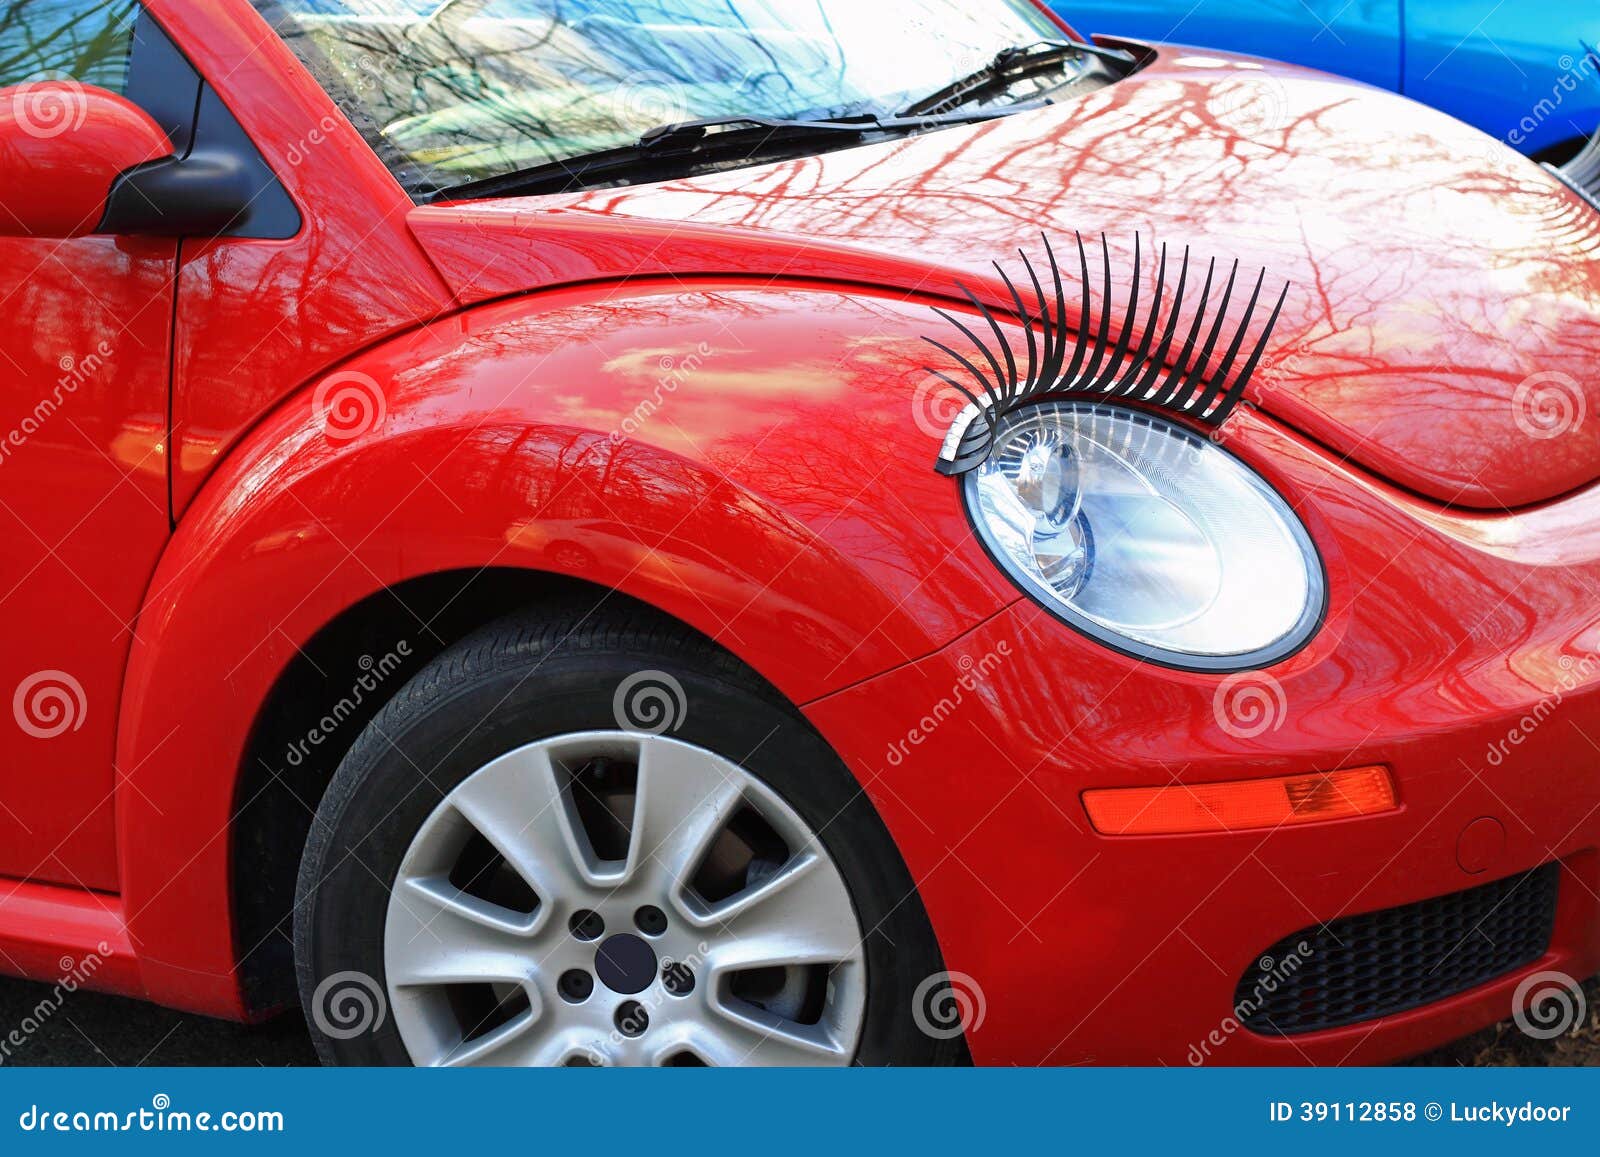 https://thumbs.dreamstime.com/z/rotes-auto-mit-den-wimpern-39112858.jpg